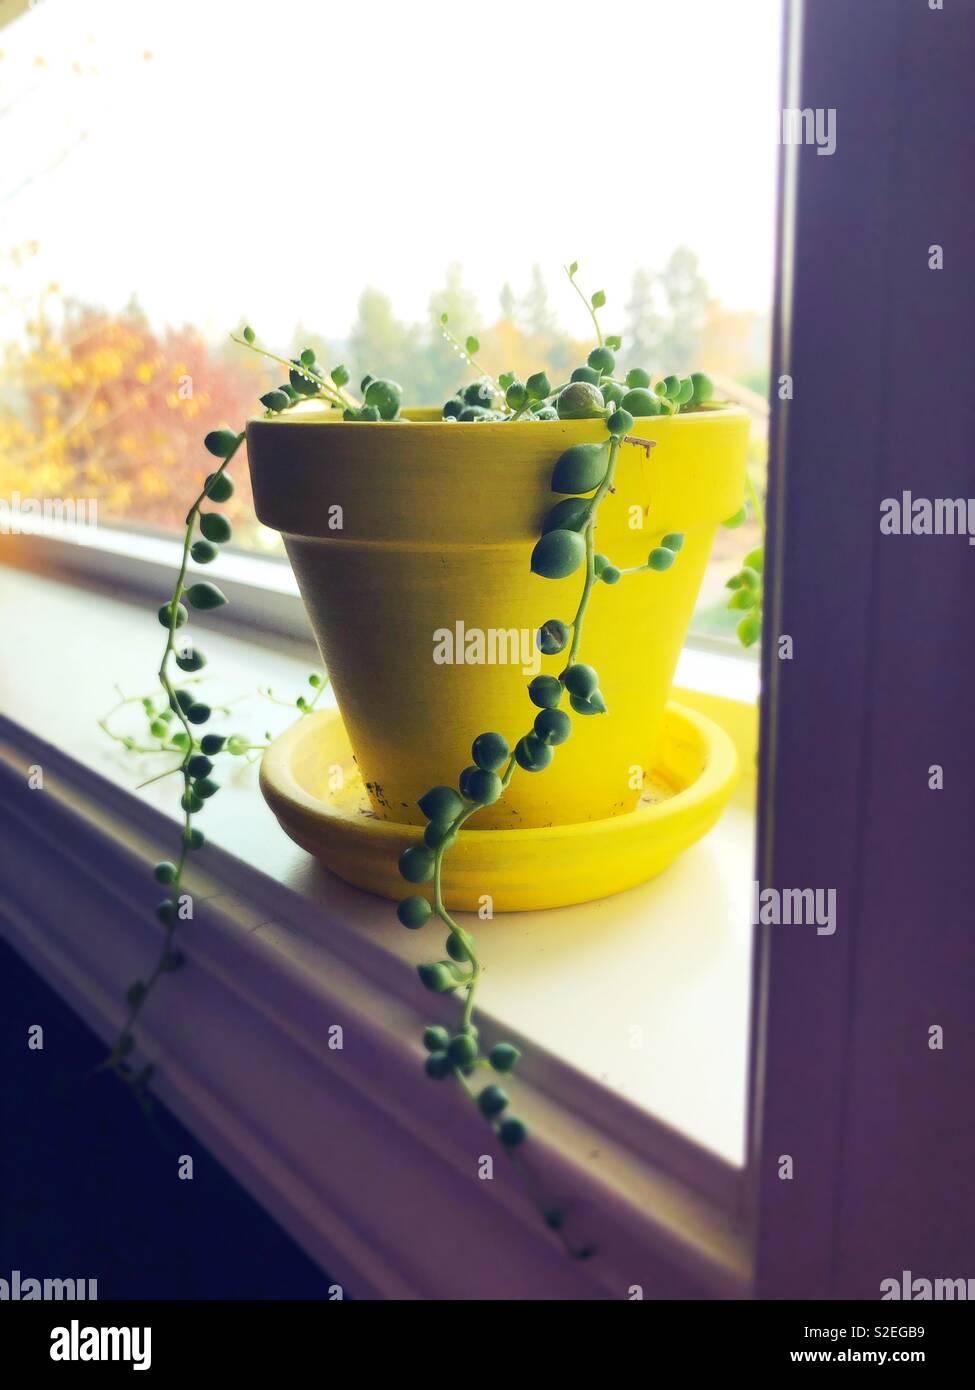 String of pearls plant. Stock Photo